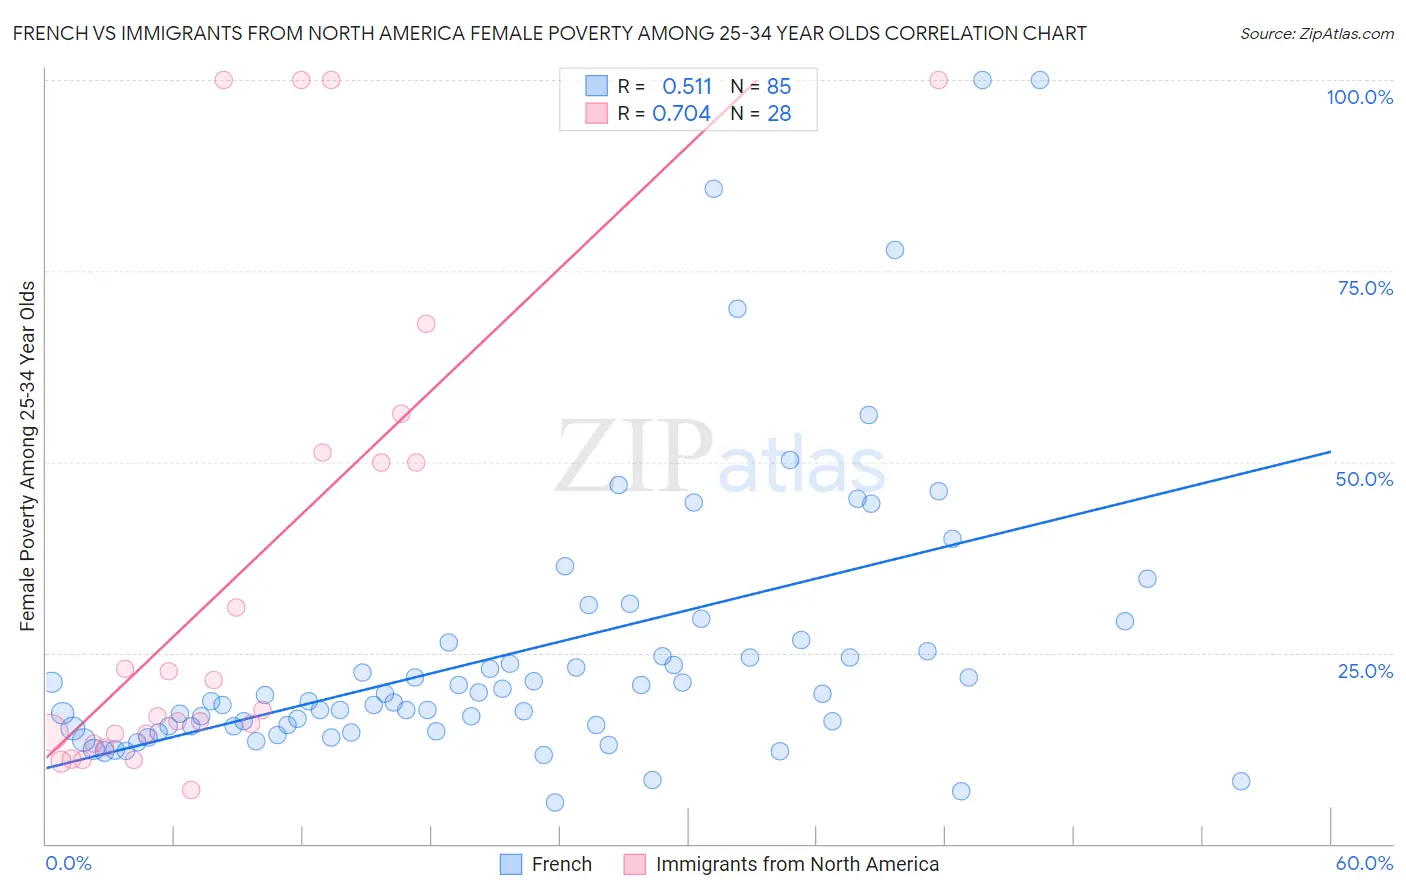 French vs Immigrants from North America Female Poverty Among 25-34 Year Olds